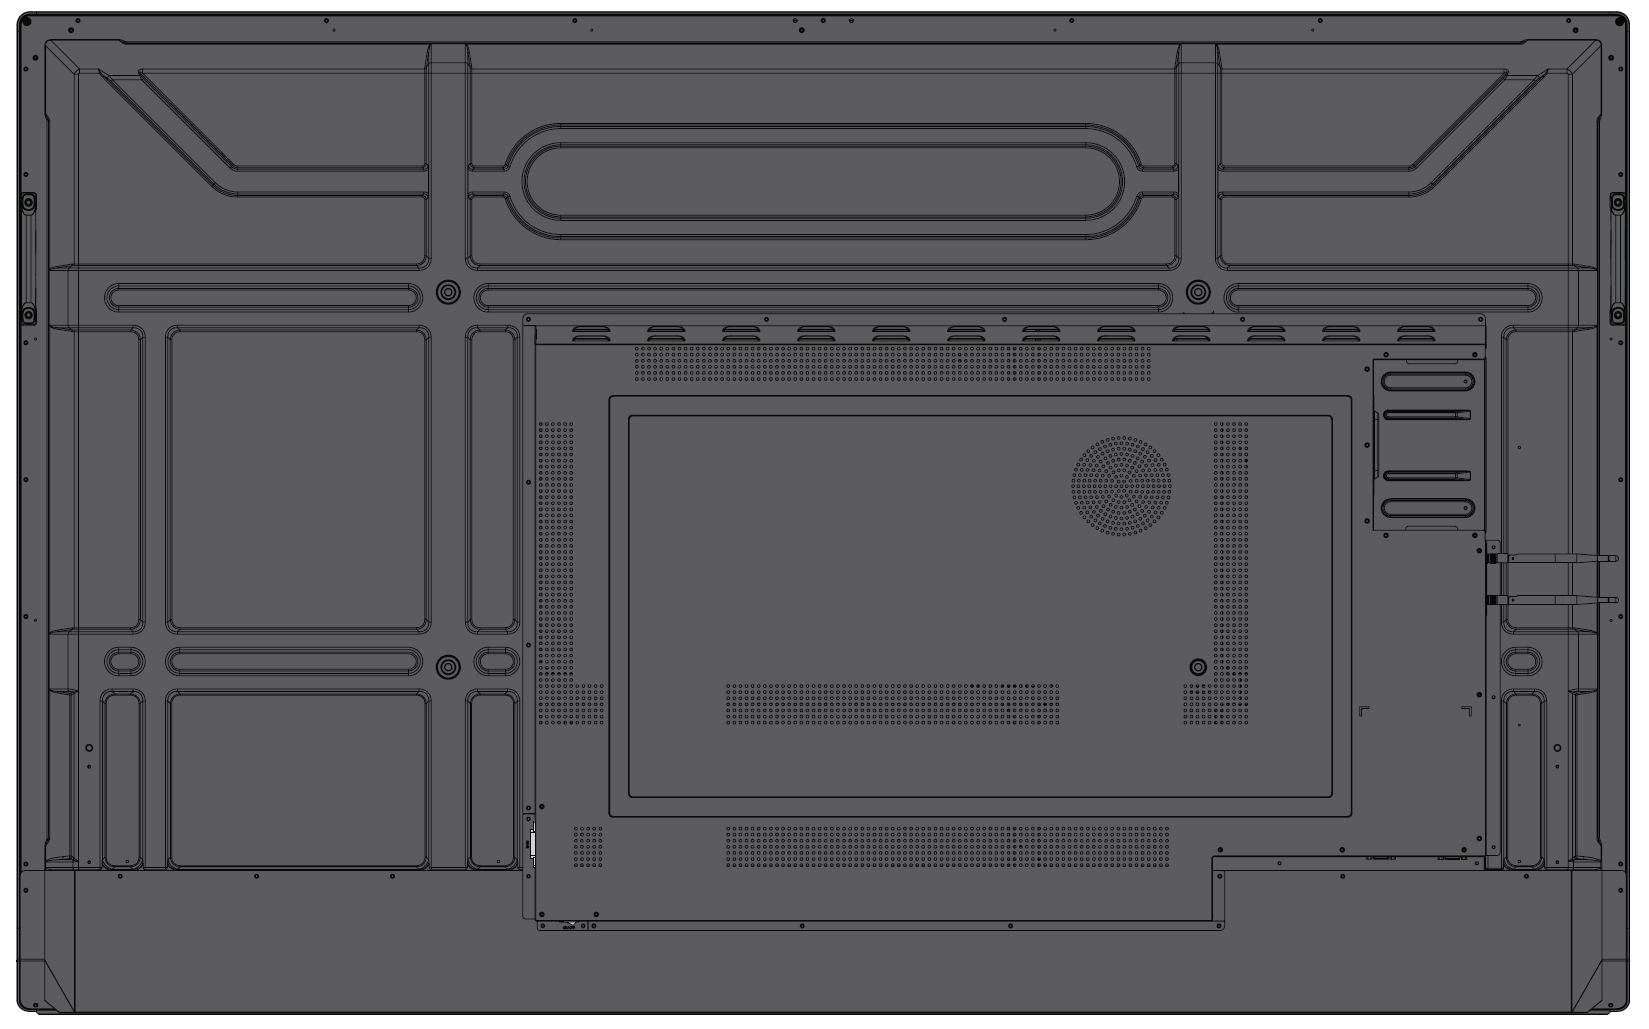 File:IFP52 Rear Overview.png